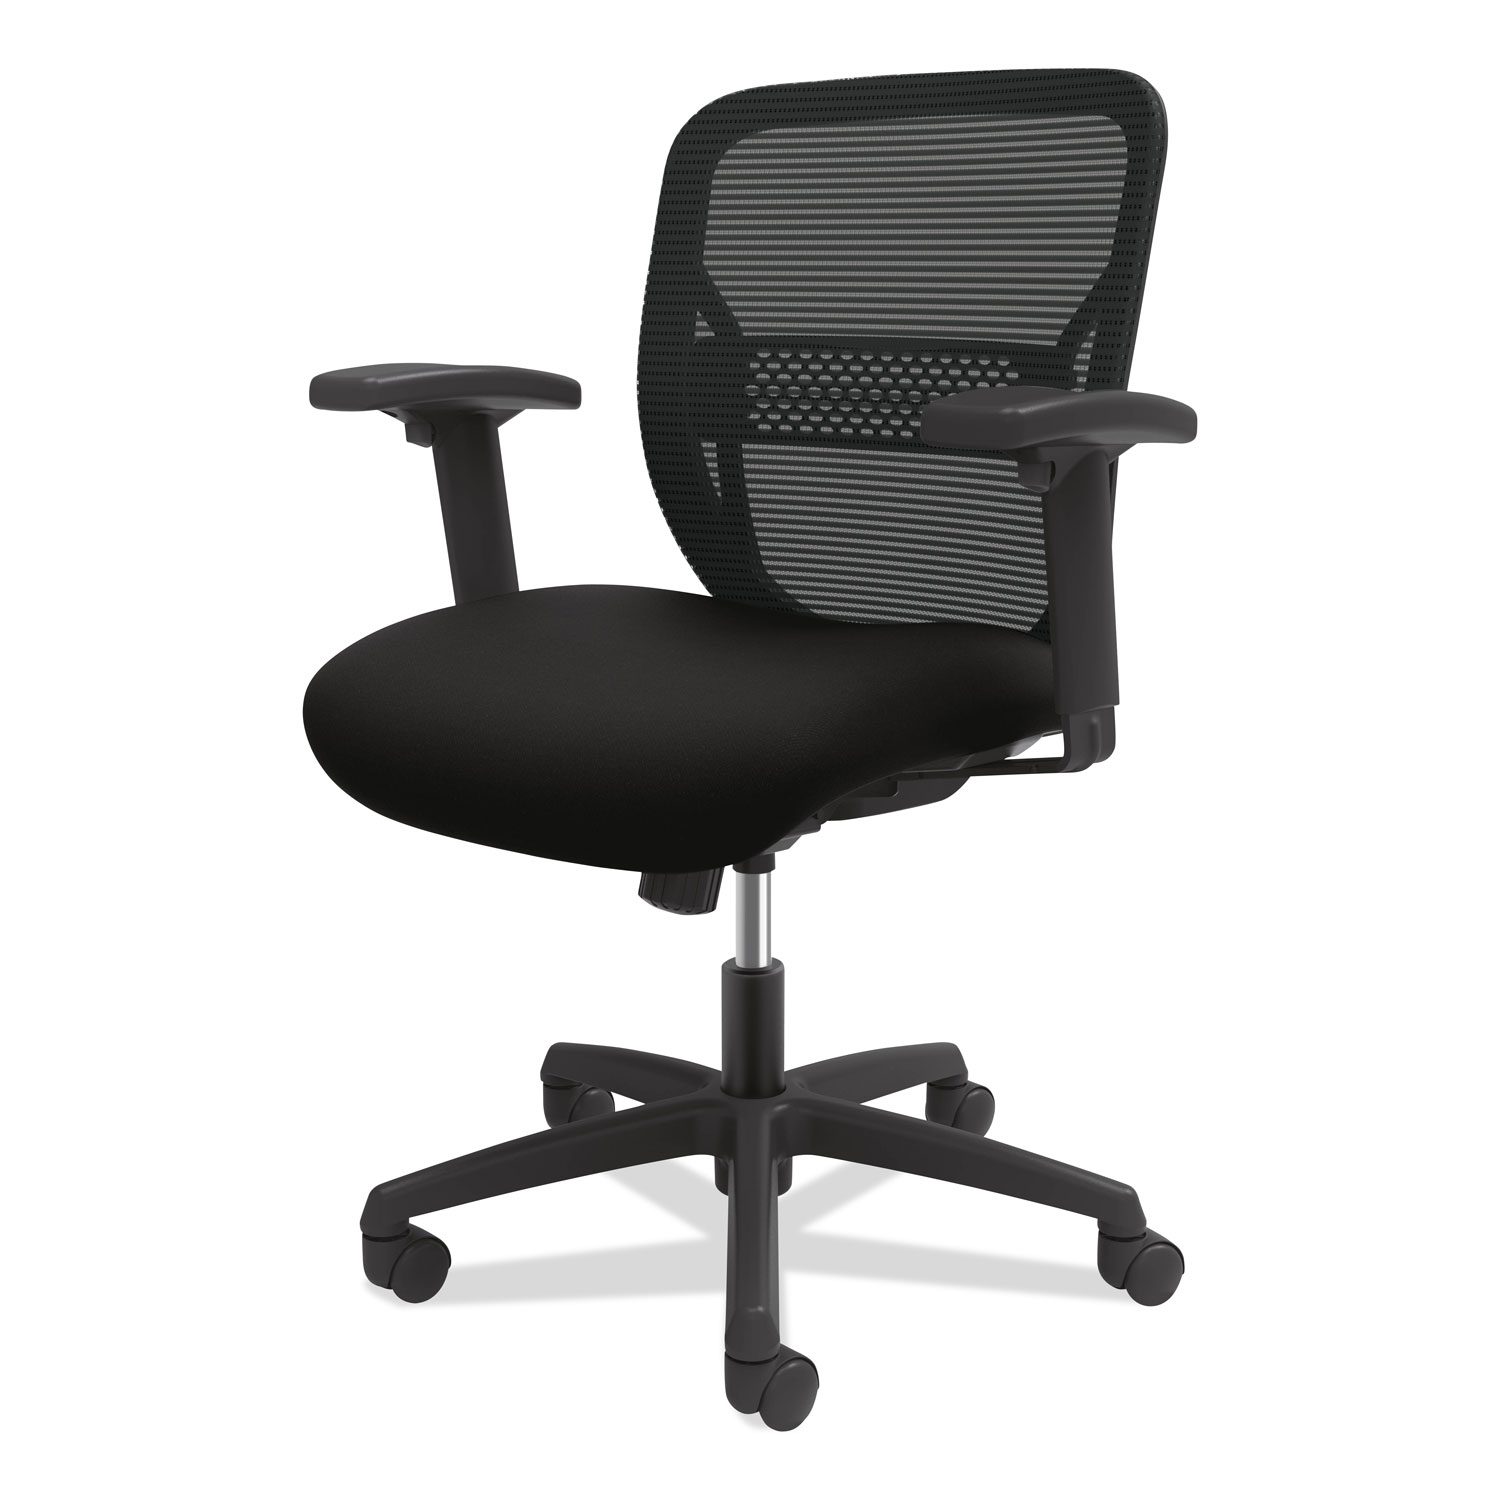  HON HONGVHMZ1ACCF10 Gateway Mid-Back Task Chair with Adjustable Arms, Supports Up to 250 lbs, Black Seat, Black Back, Black Base (HONGVHMZ1ACCF10) 